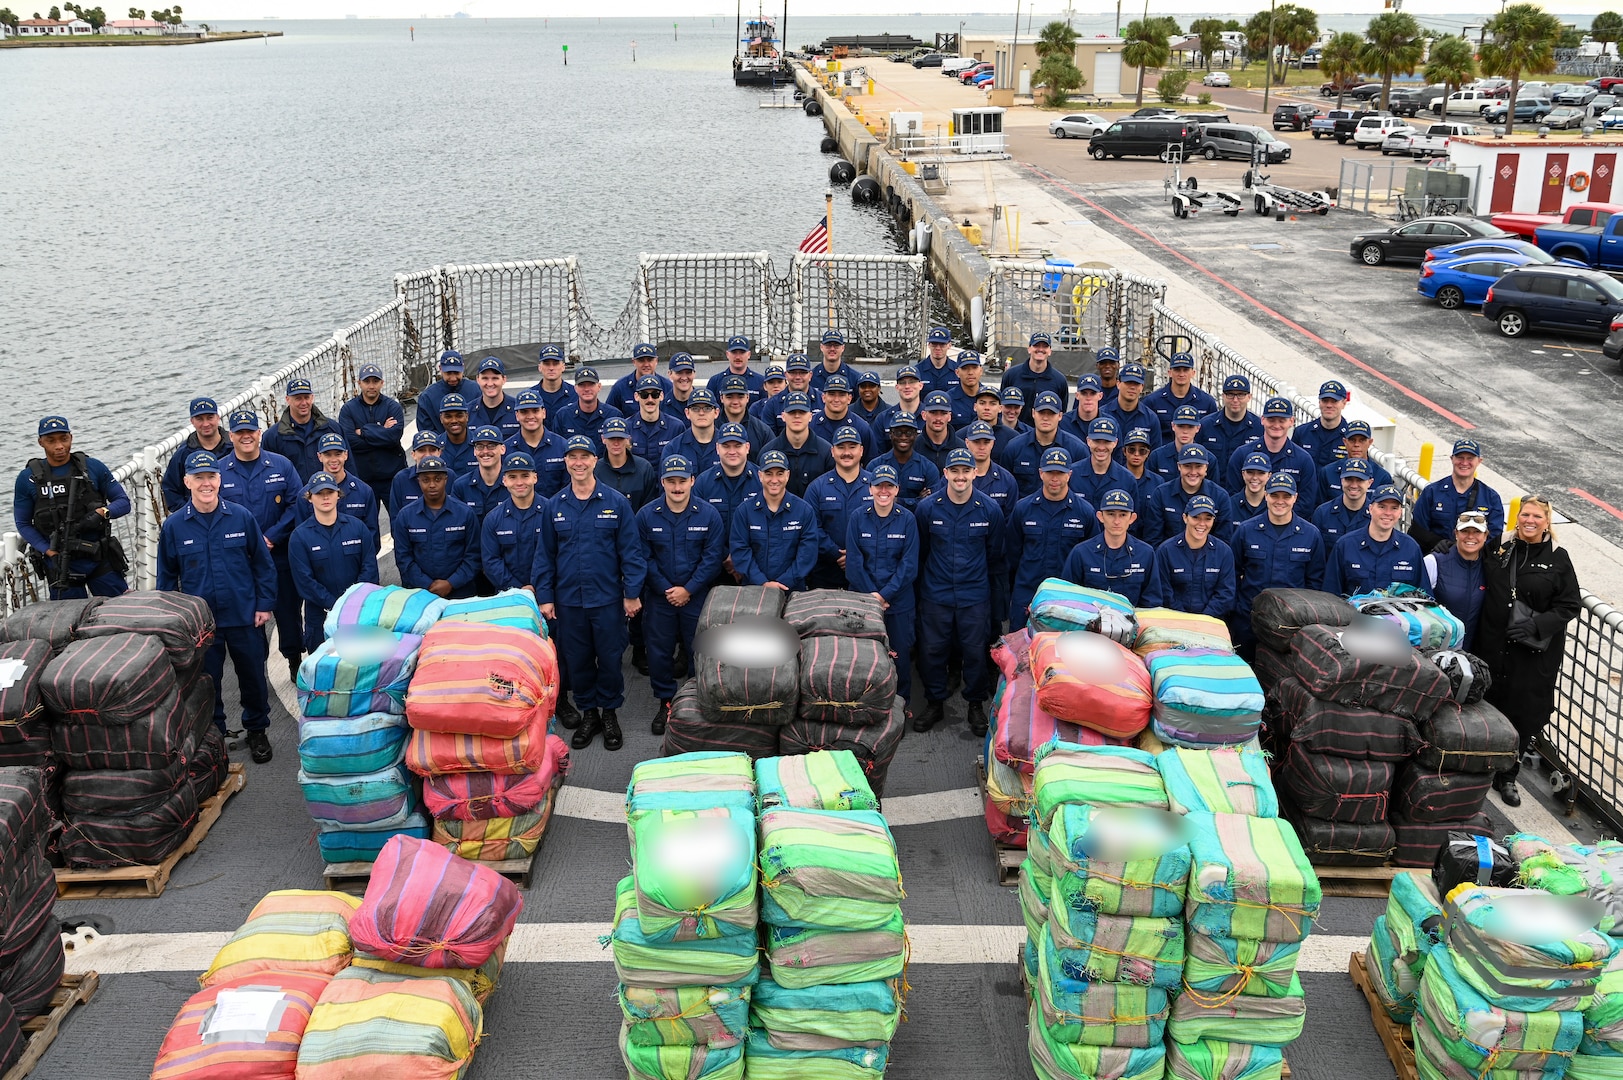 The crew of the Coast Guard Cutter Resolute pose in front of interdicted drugs, Jan. 29, 2024, in St. Petersburg, FL. Drug interdiction is one of the 11 statutory missions of the Coast Guard. (U.S. Coast Guard photo by Petty Officer 3rd Class Nicholas Strasburg)